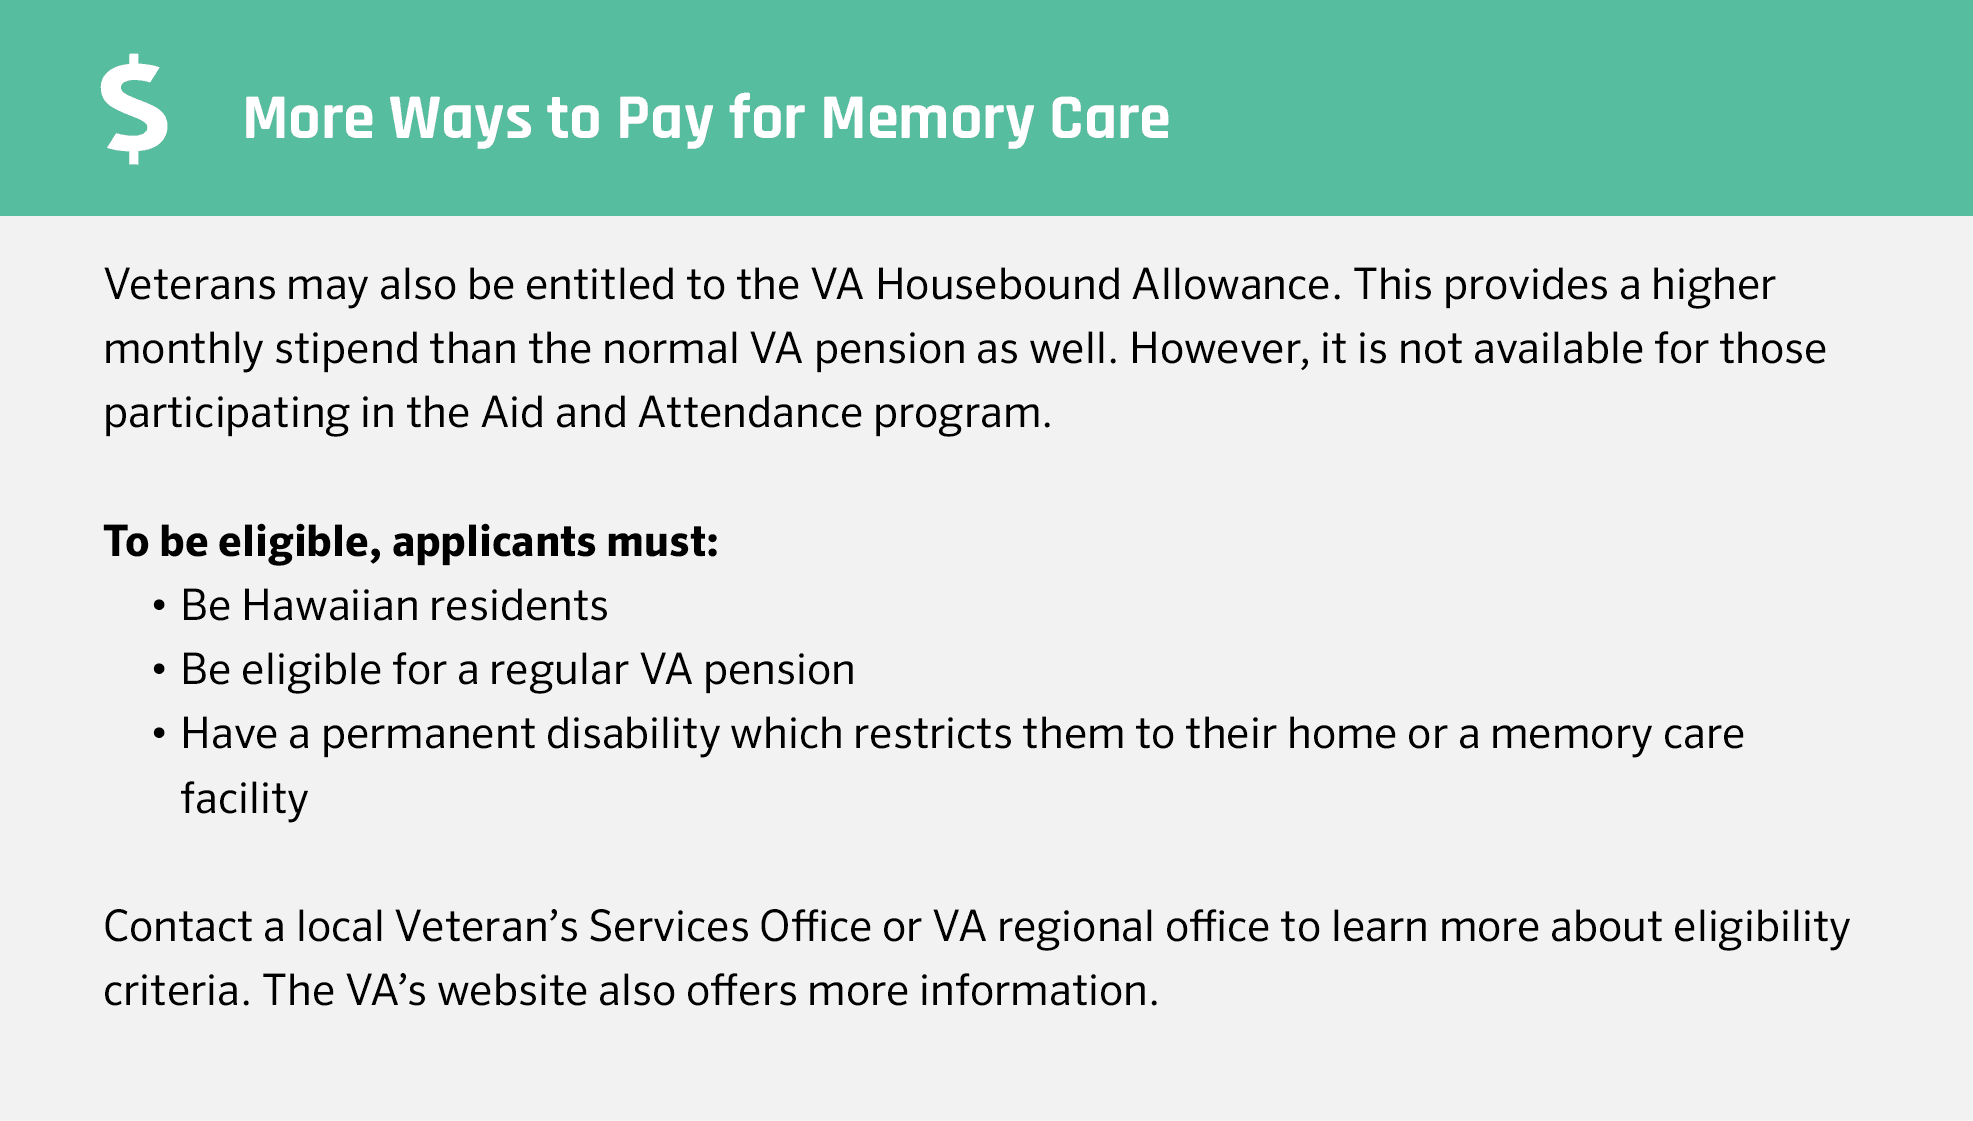 More ways to pay for memory care in Hawaii